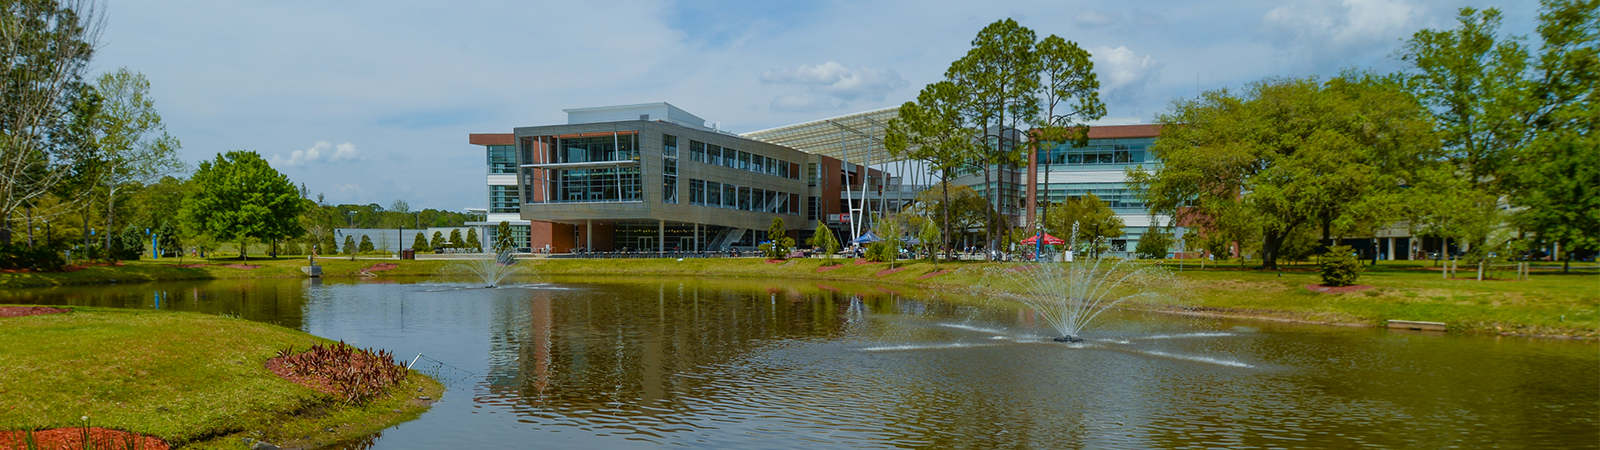 Student Union with lake in front and surrounded by trees